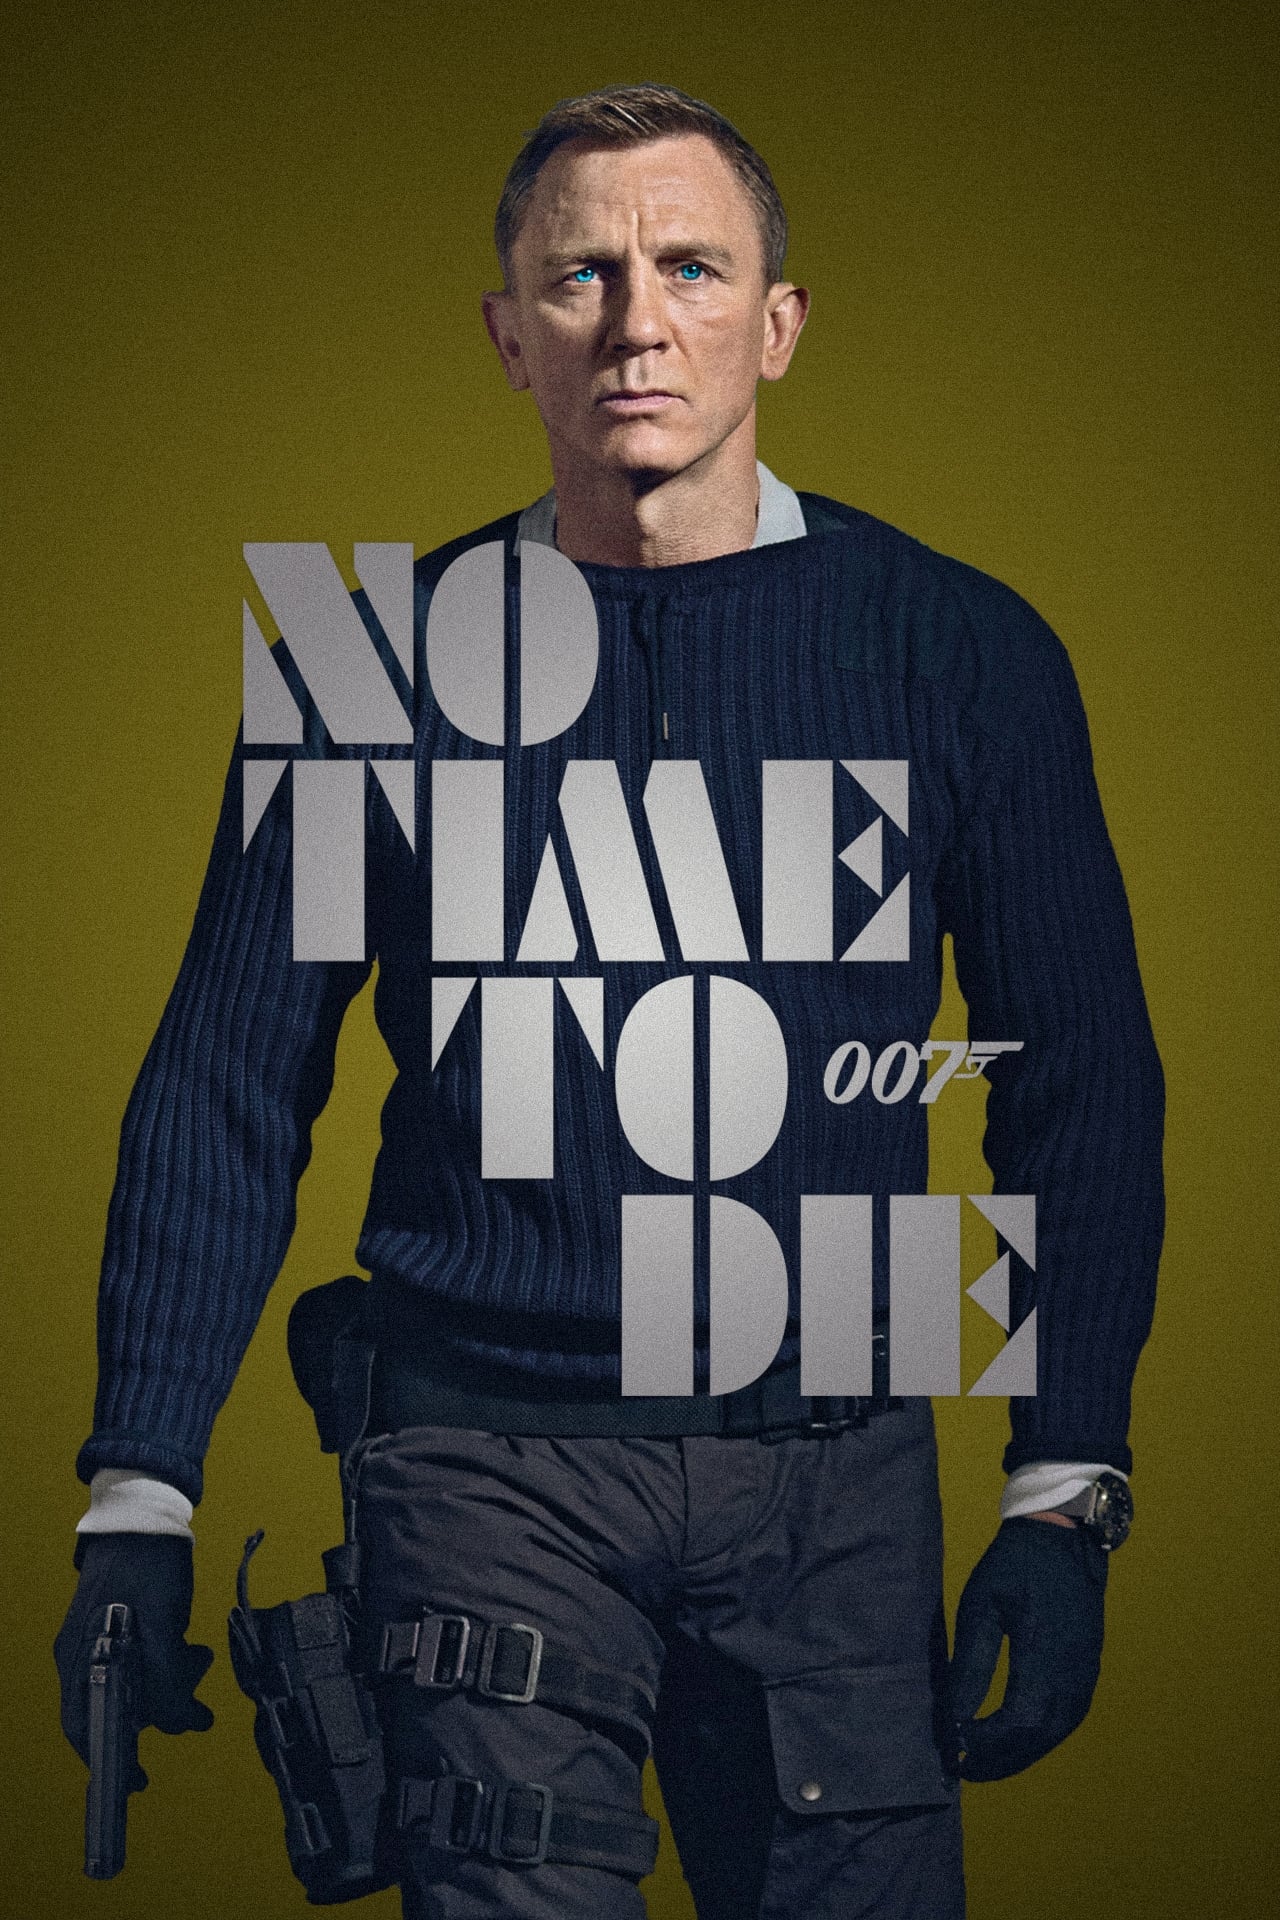 No Time to Die POSTER